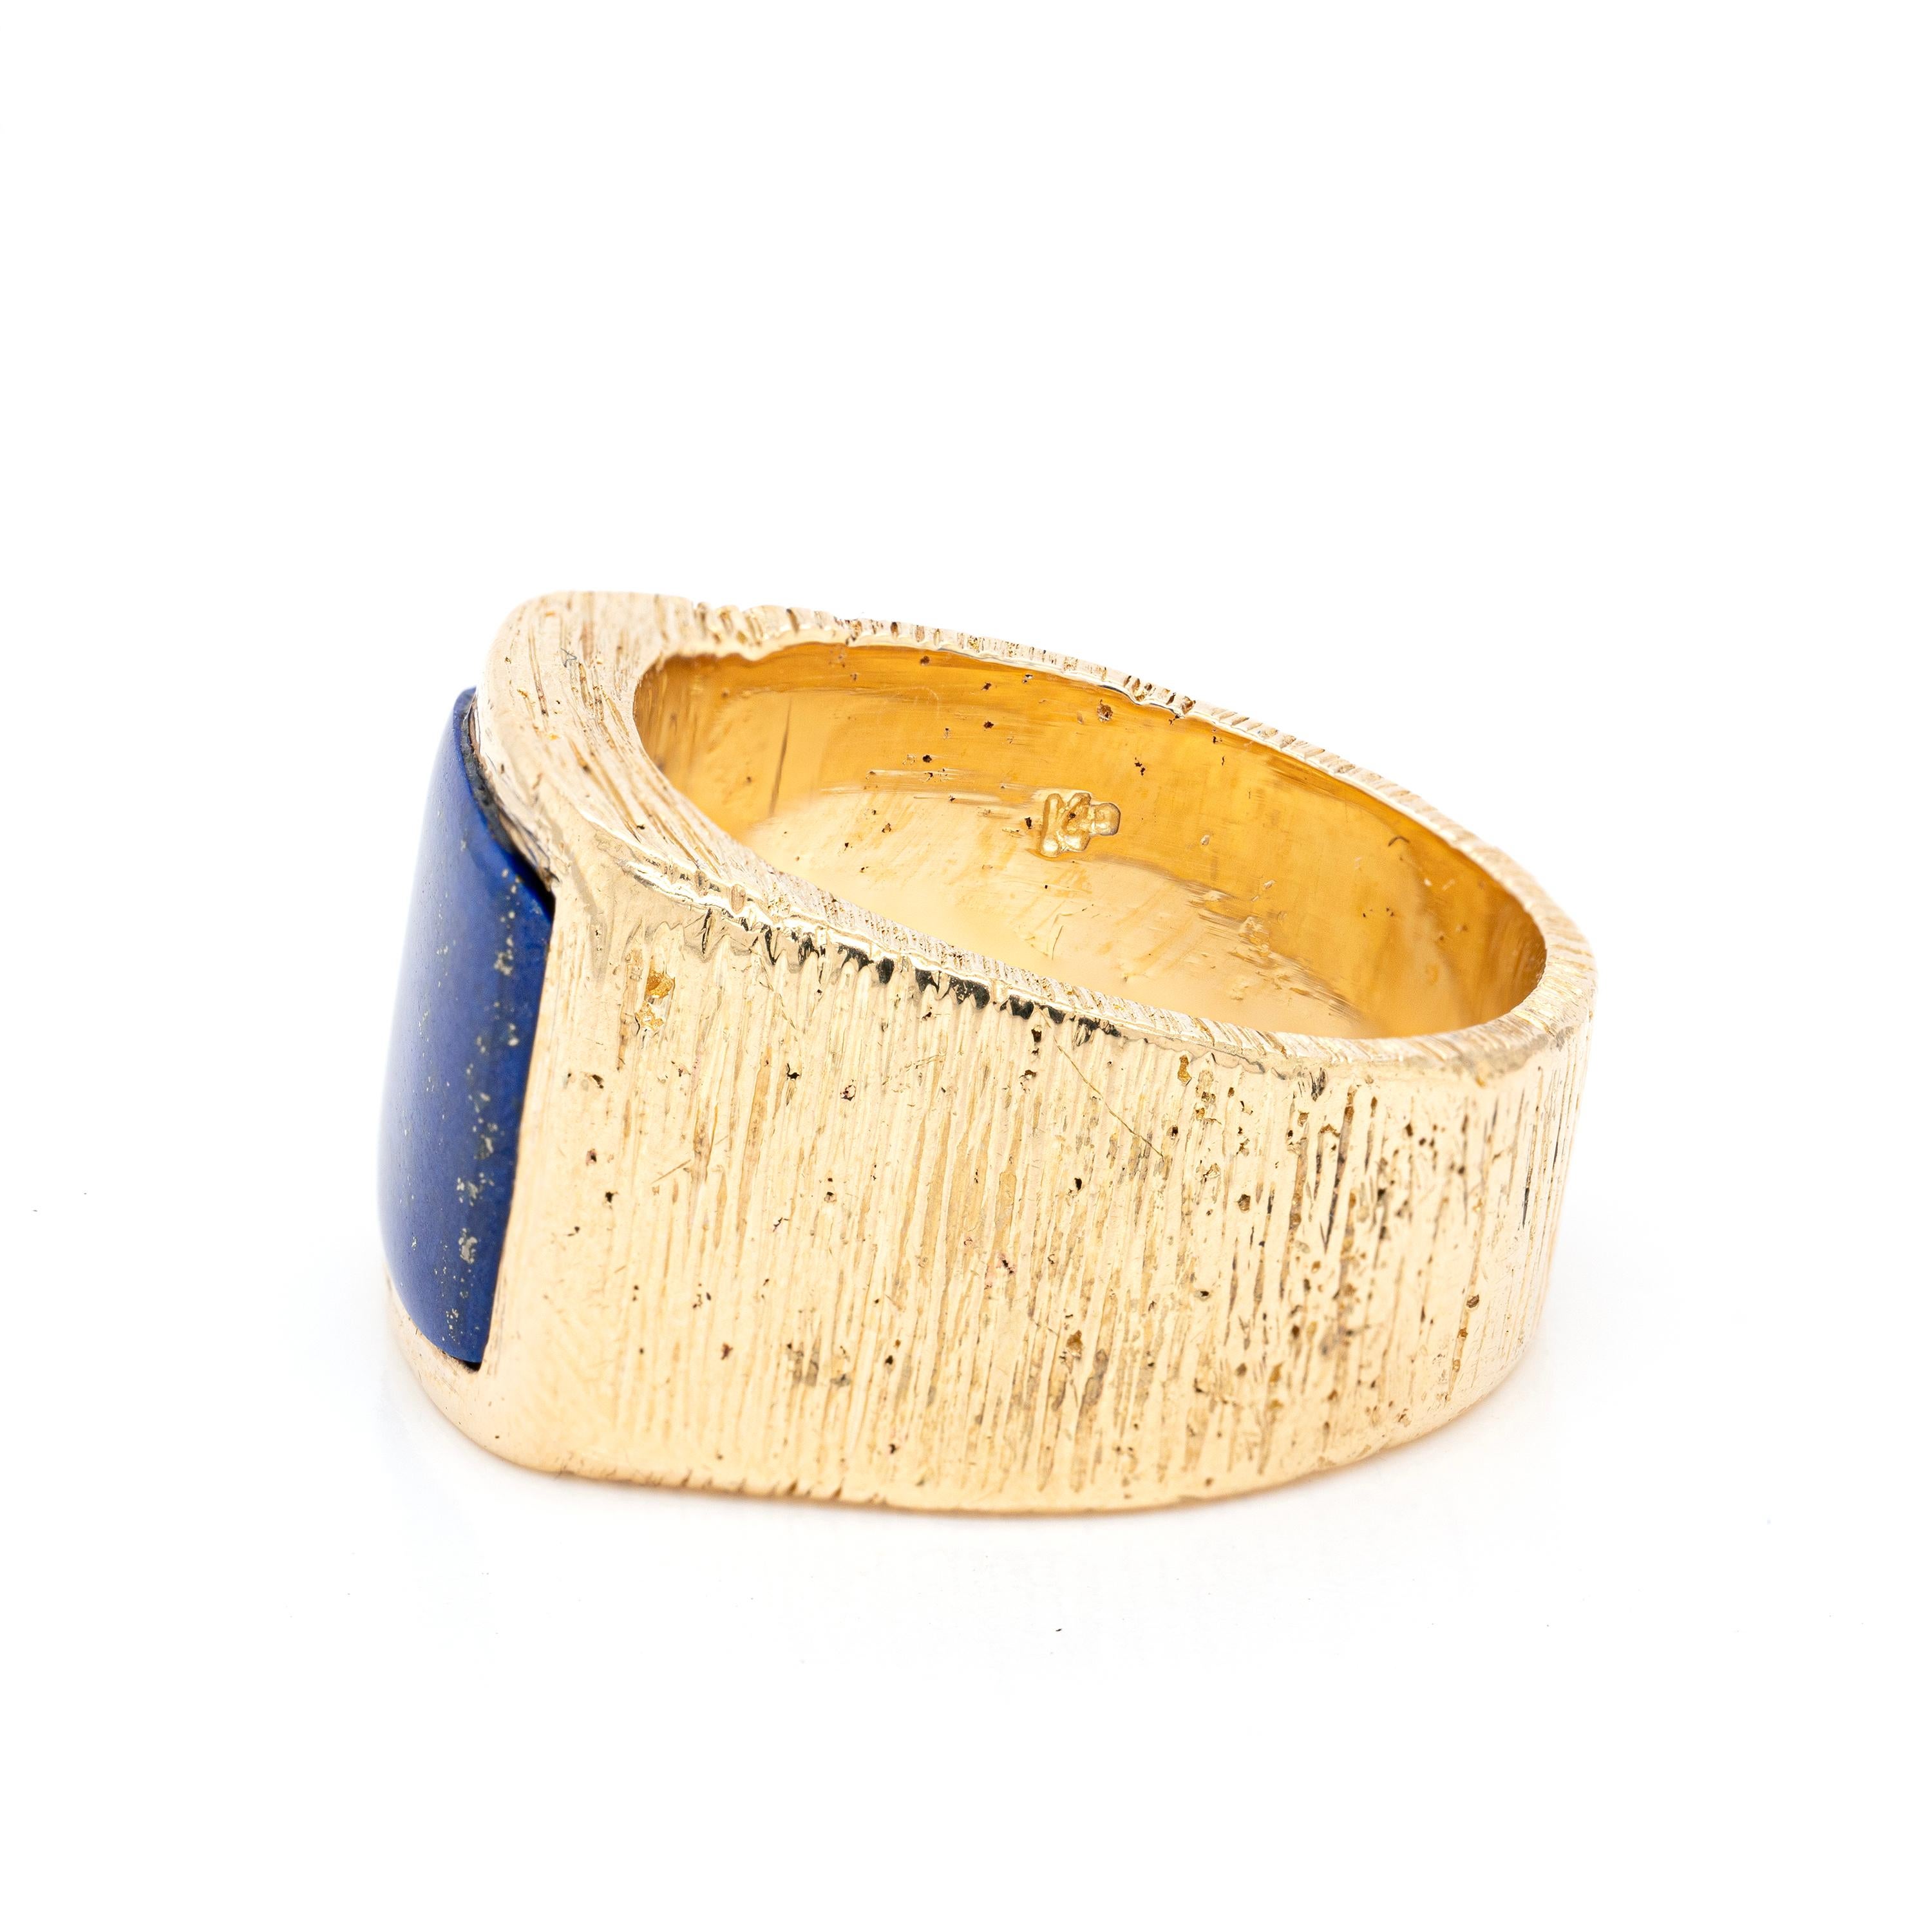 This one of a kind signet ring by the iconic British house of Kutchinsky features a chunky design meticulously crafted from 18 carat yellow gold with a textured finish top. The bold square mount is beautifully set with a 11.7 x 9.9mm lapis lazuli,